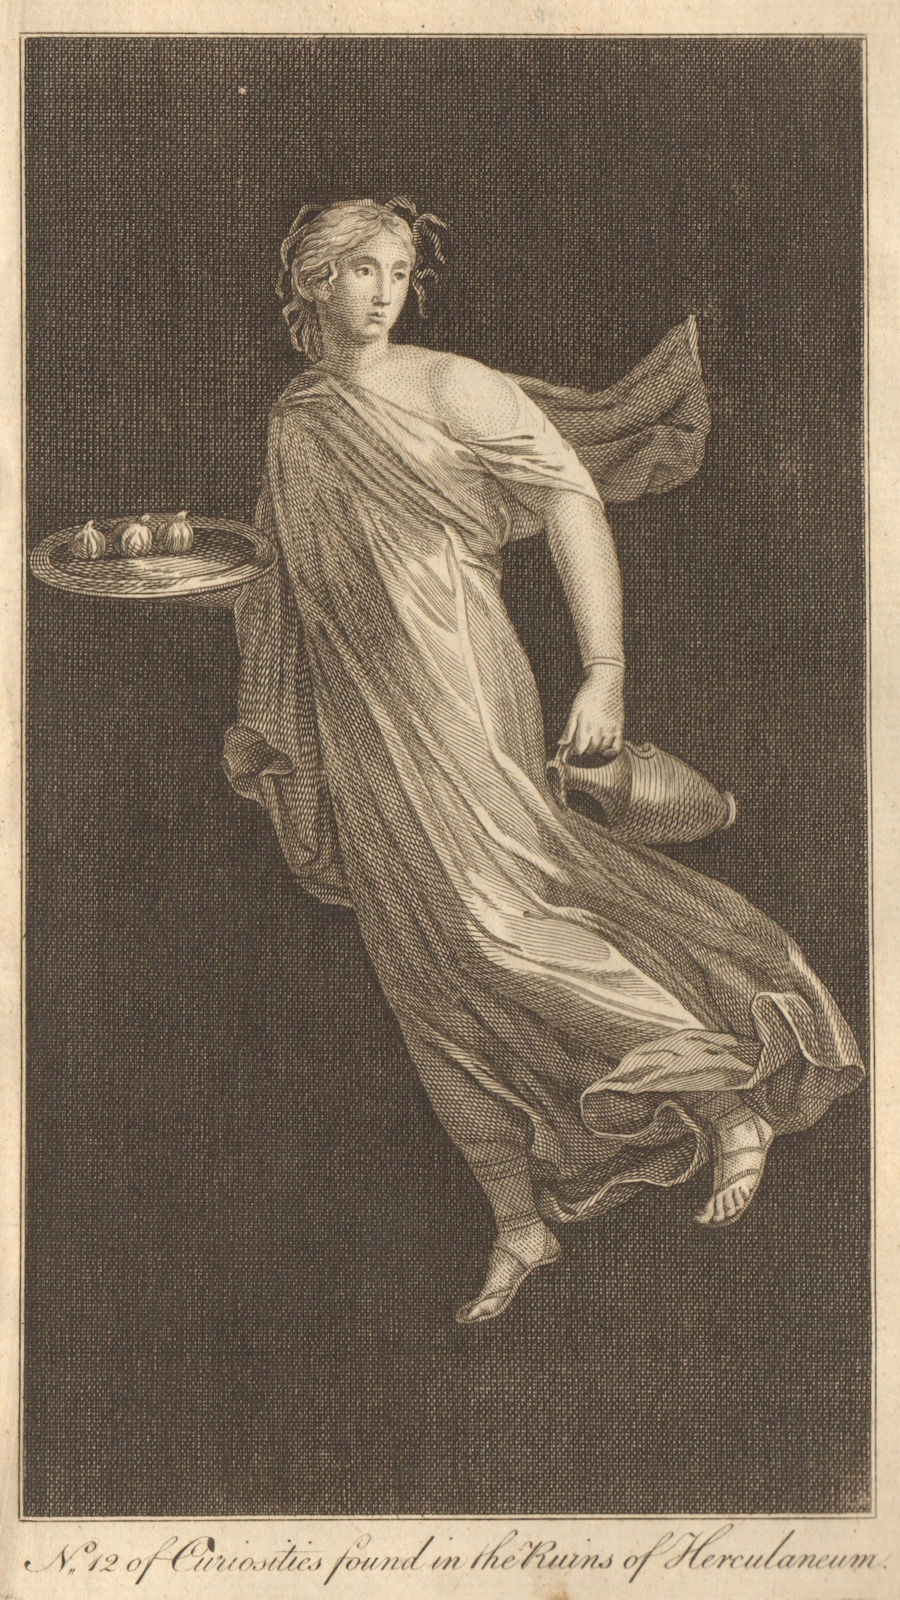 Herculaneum curiosities. Painting: a nymph carrying fruit in a dish 1775 print